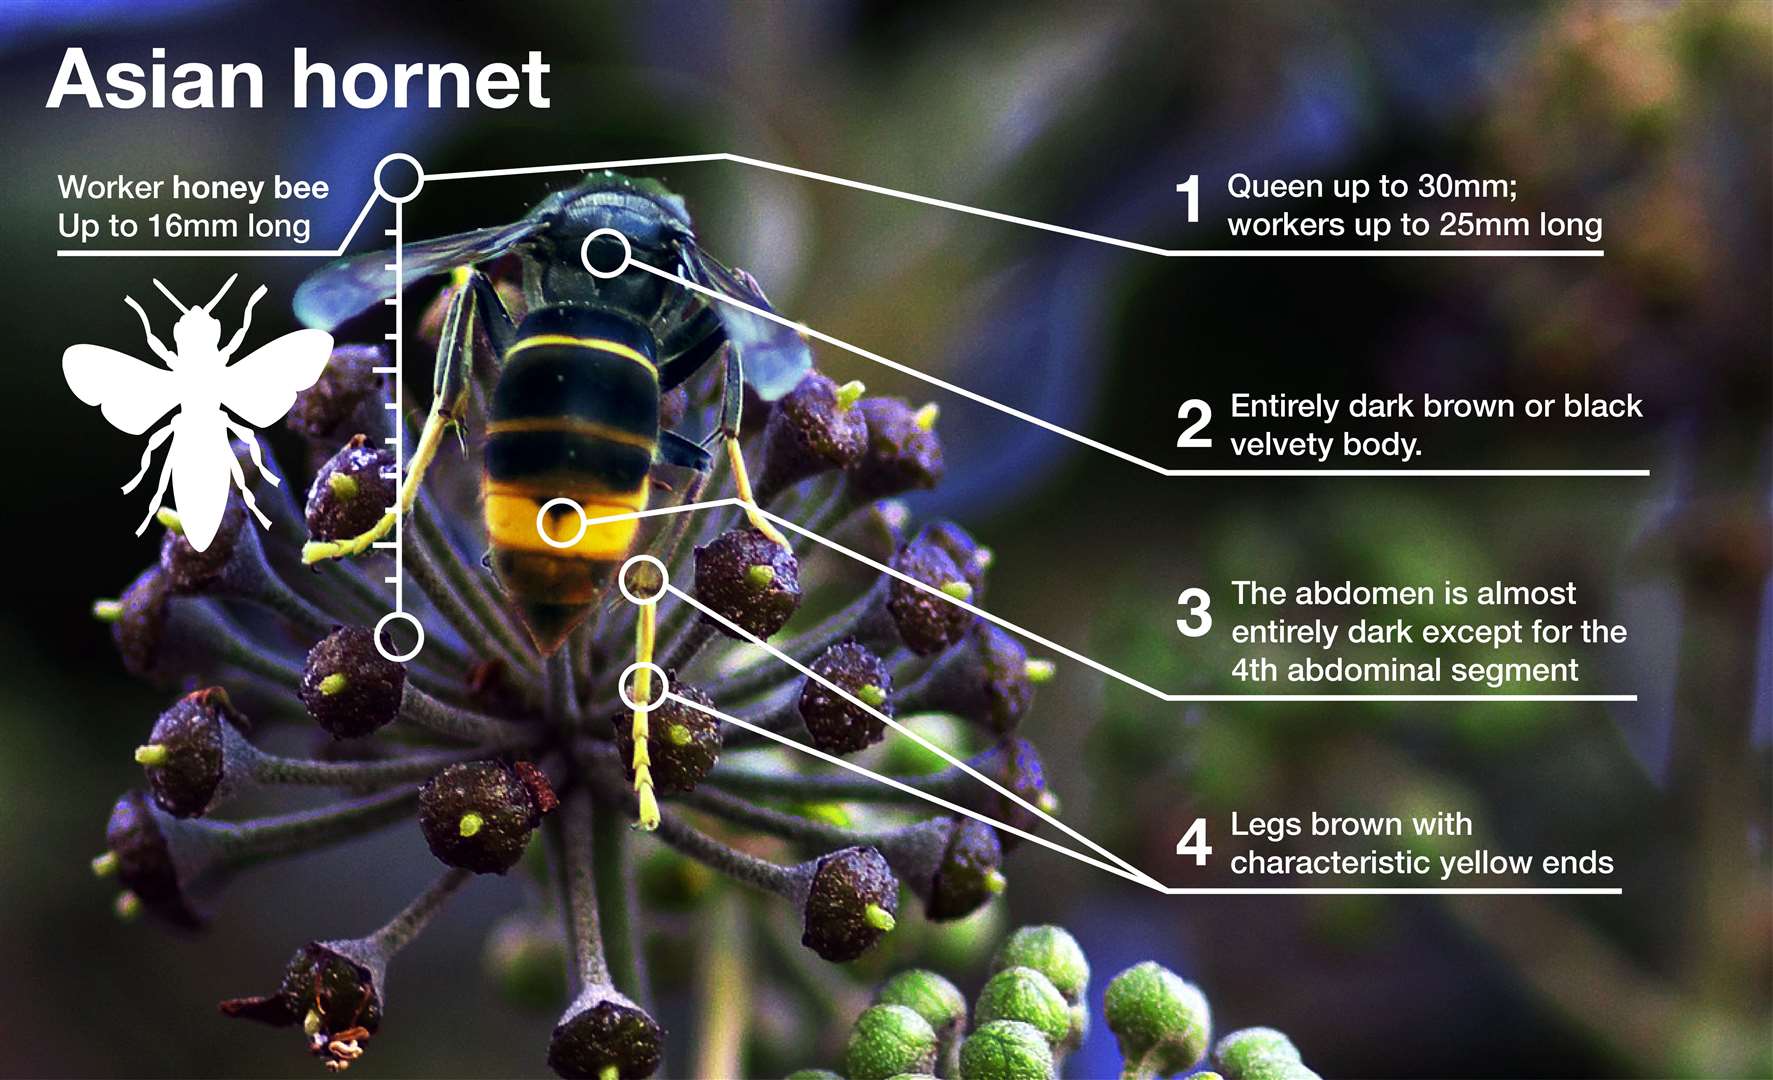 Defra images show the distinctive characteristics of the Asian hornet